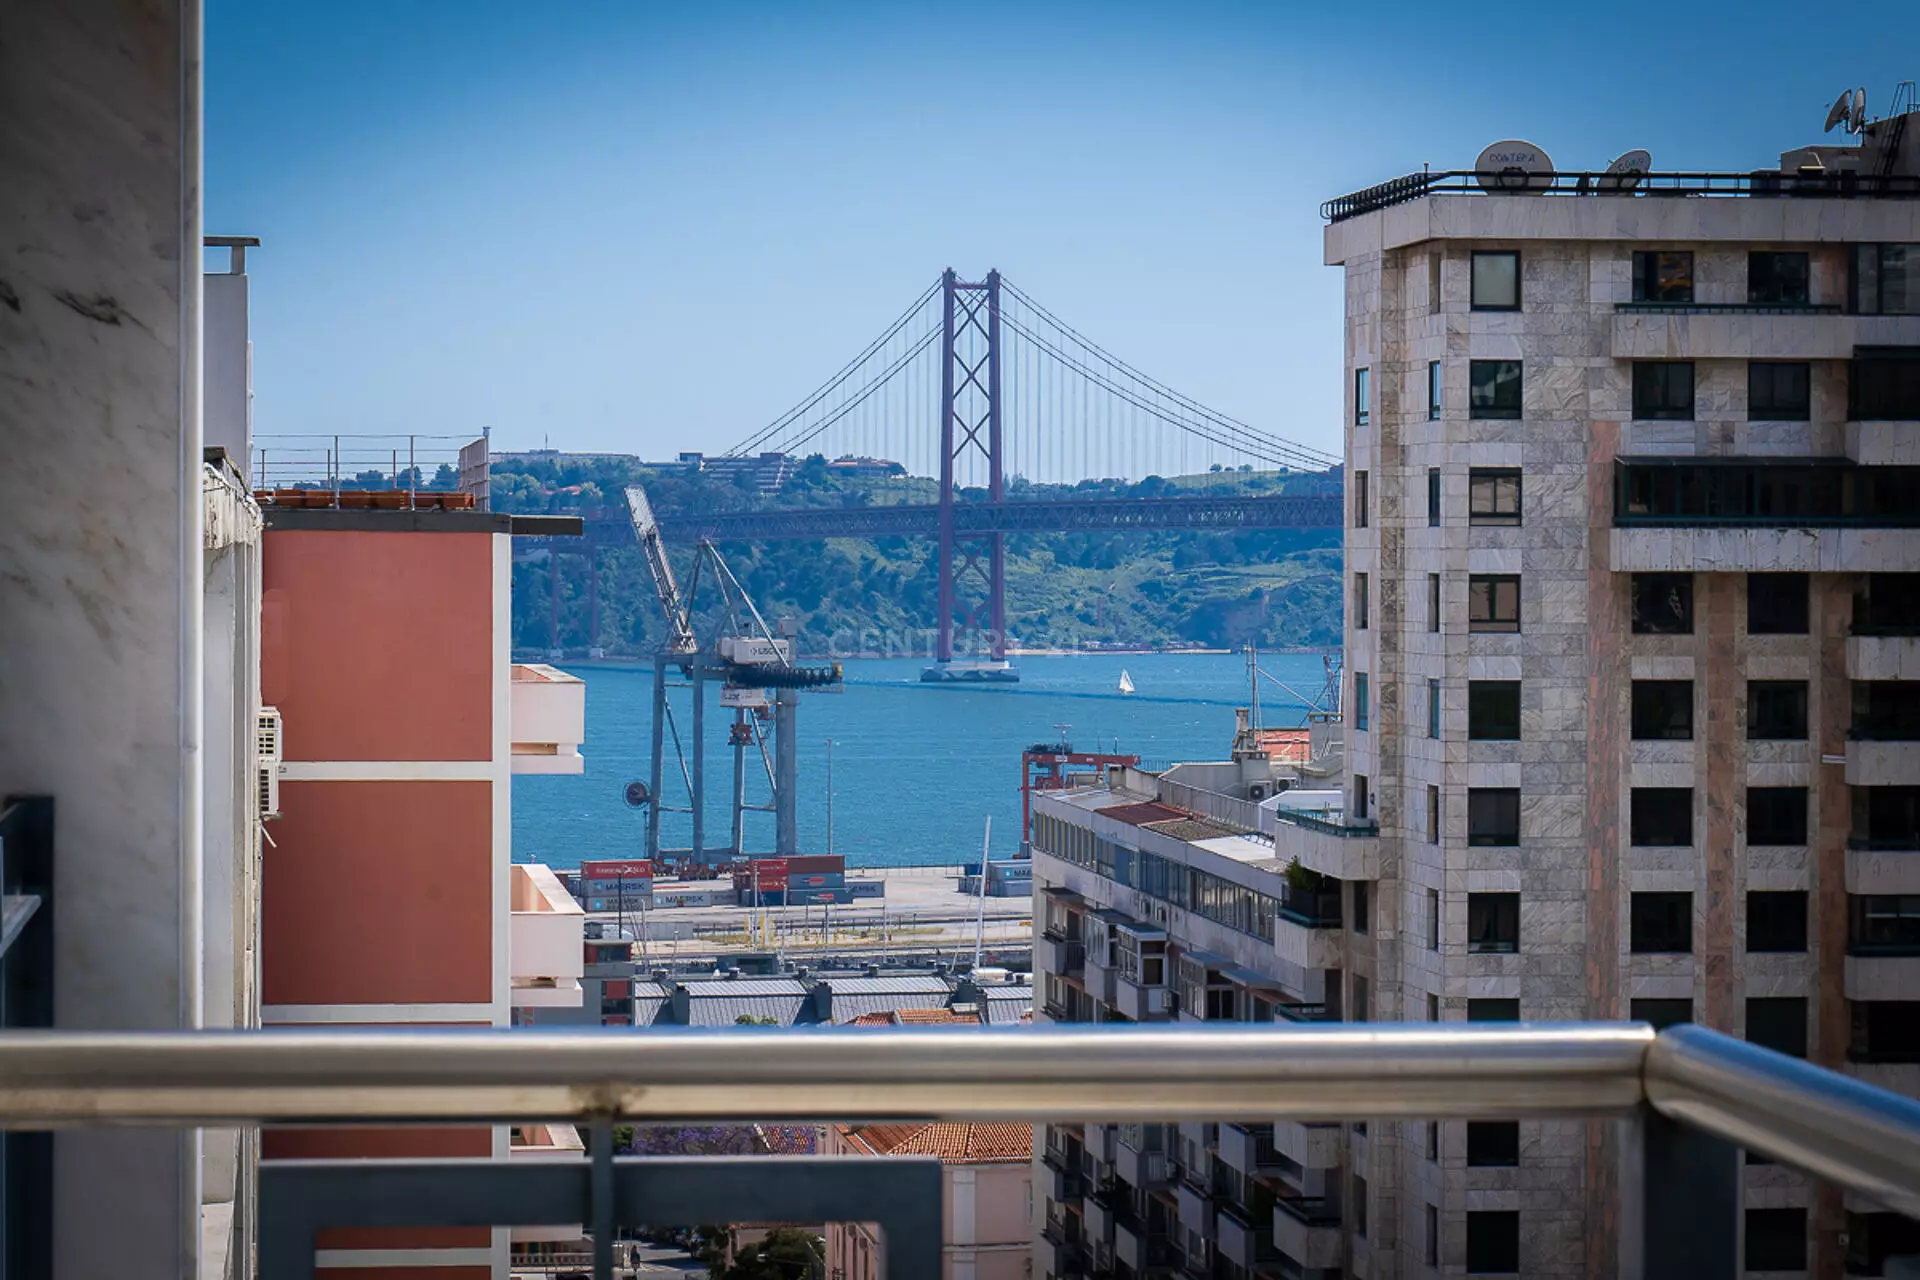 4 Bedroom Apartment With River View Avenida Infante Santo, In The Center Of Lisbon